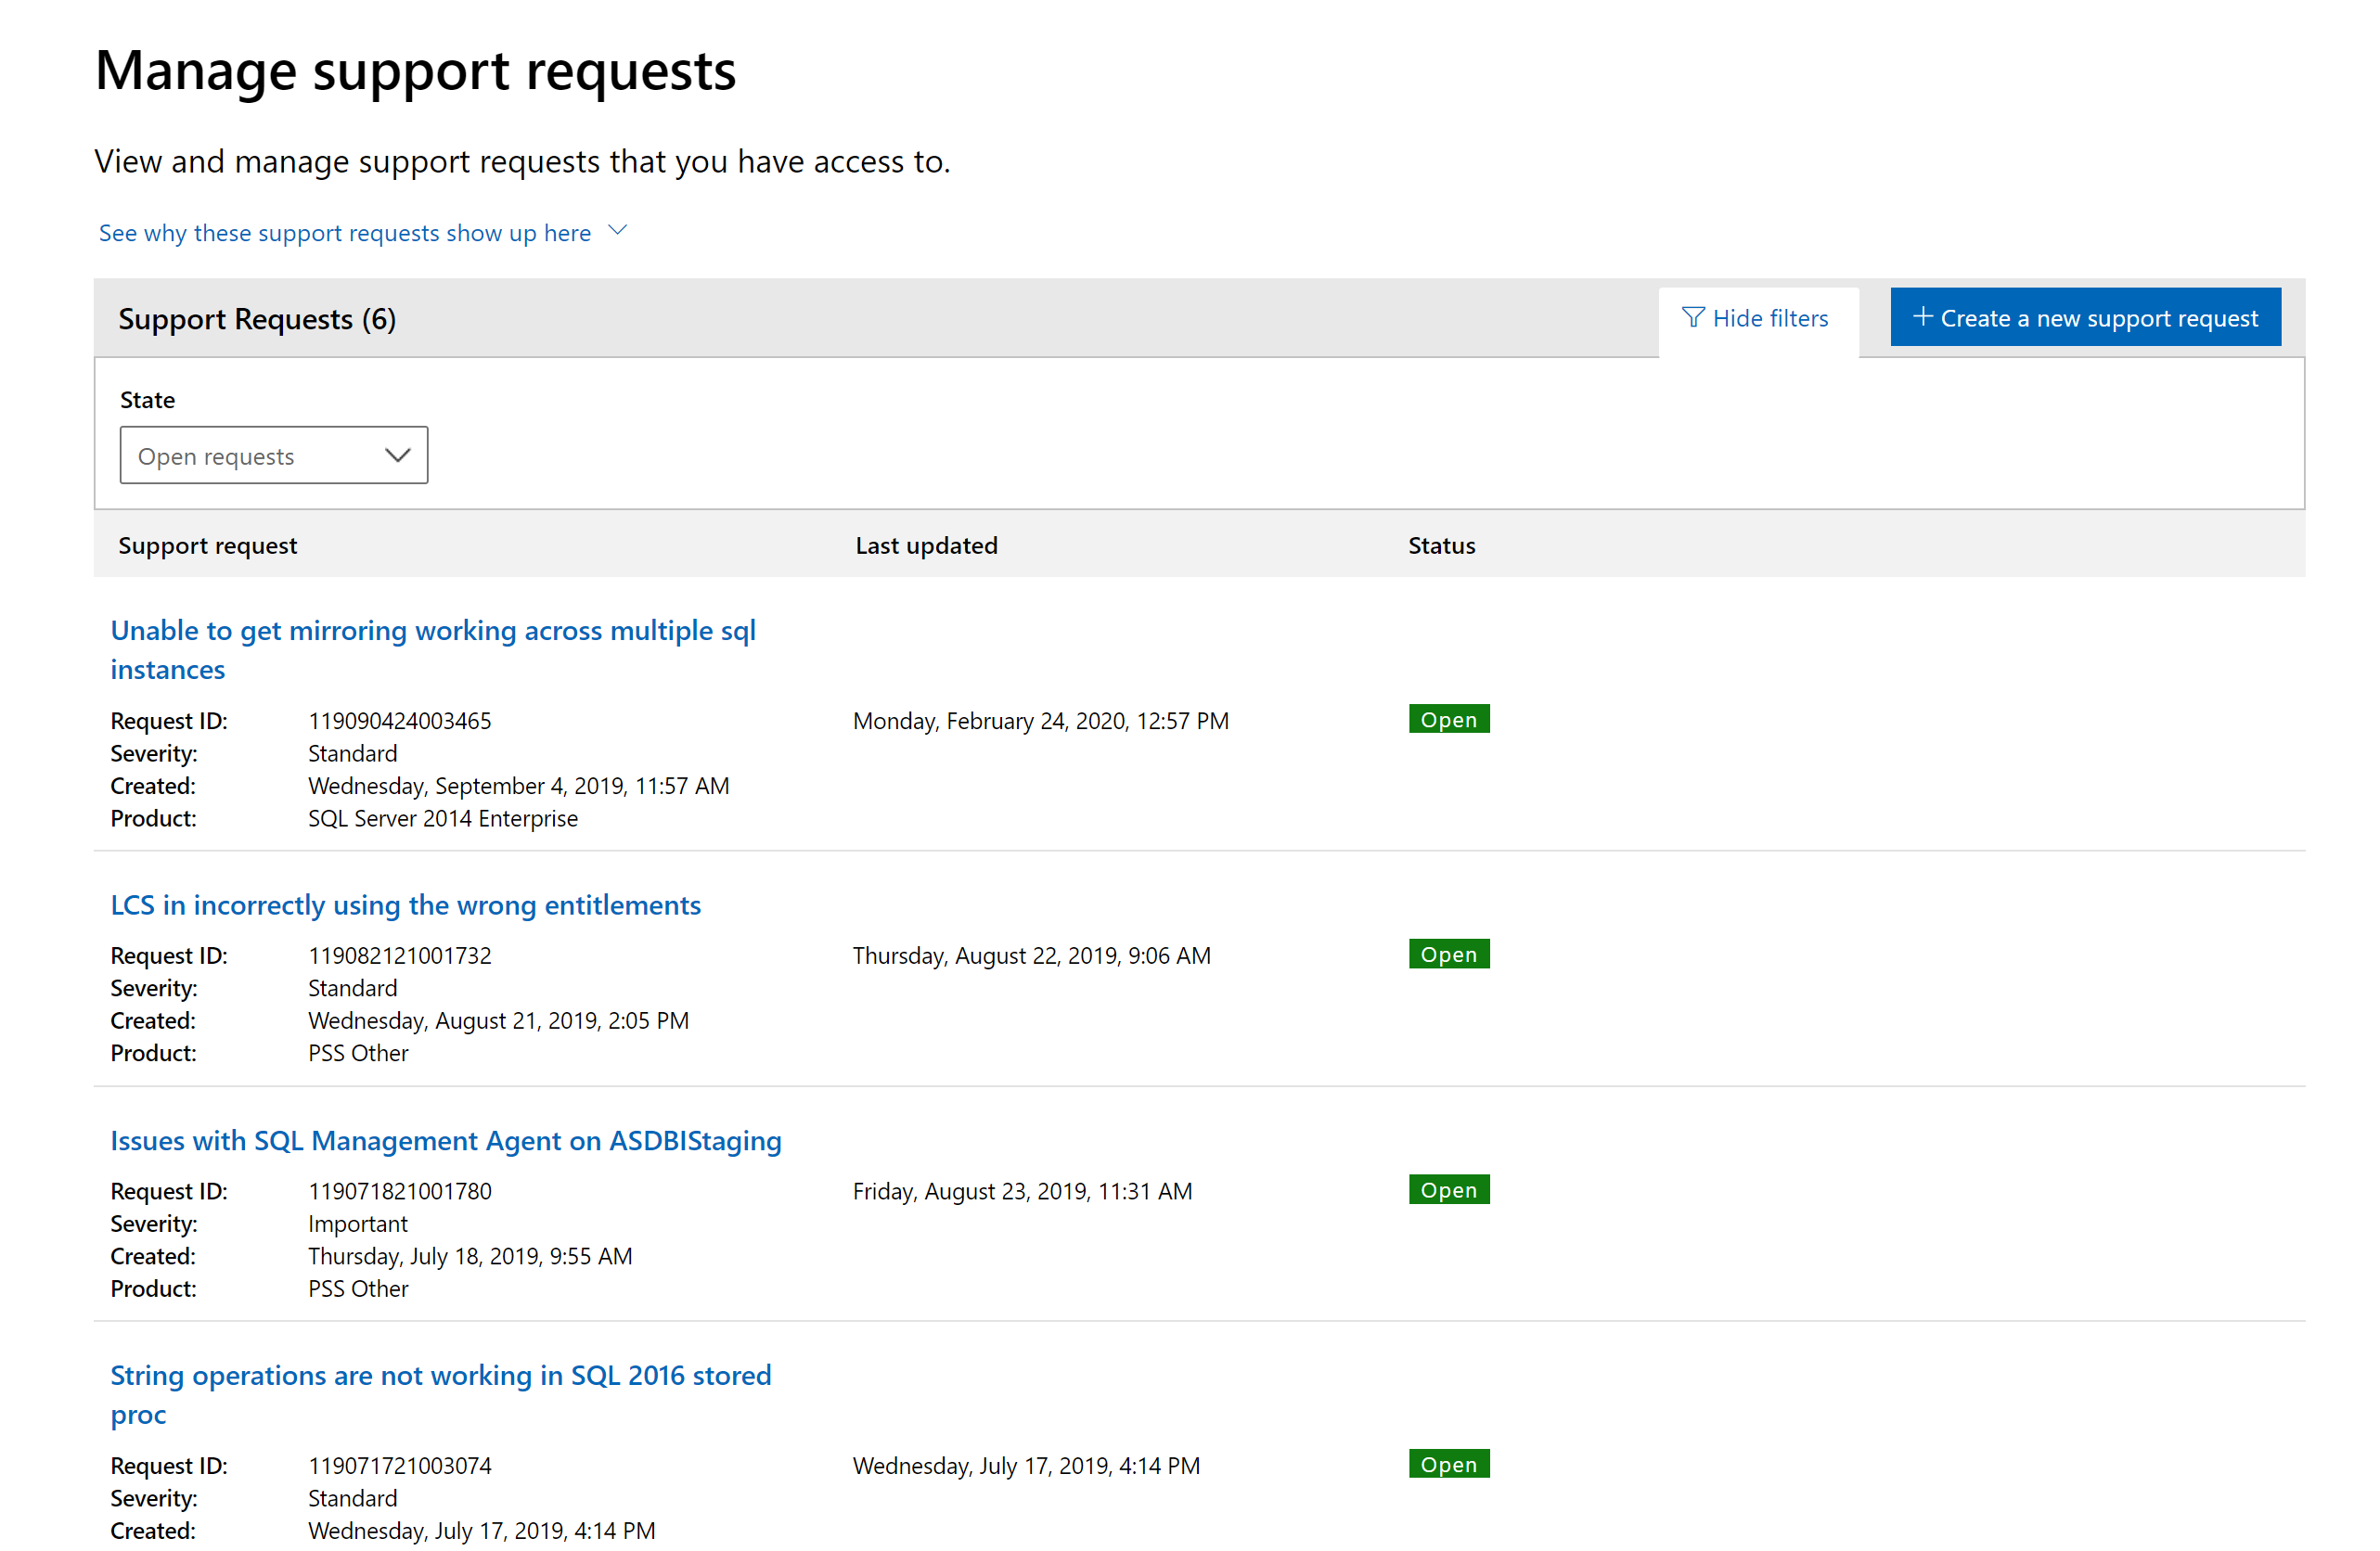 Manage Support Requests Page